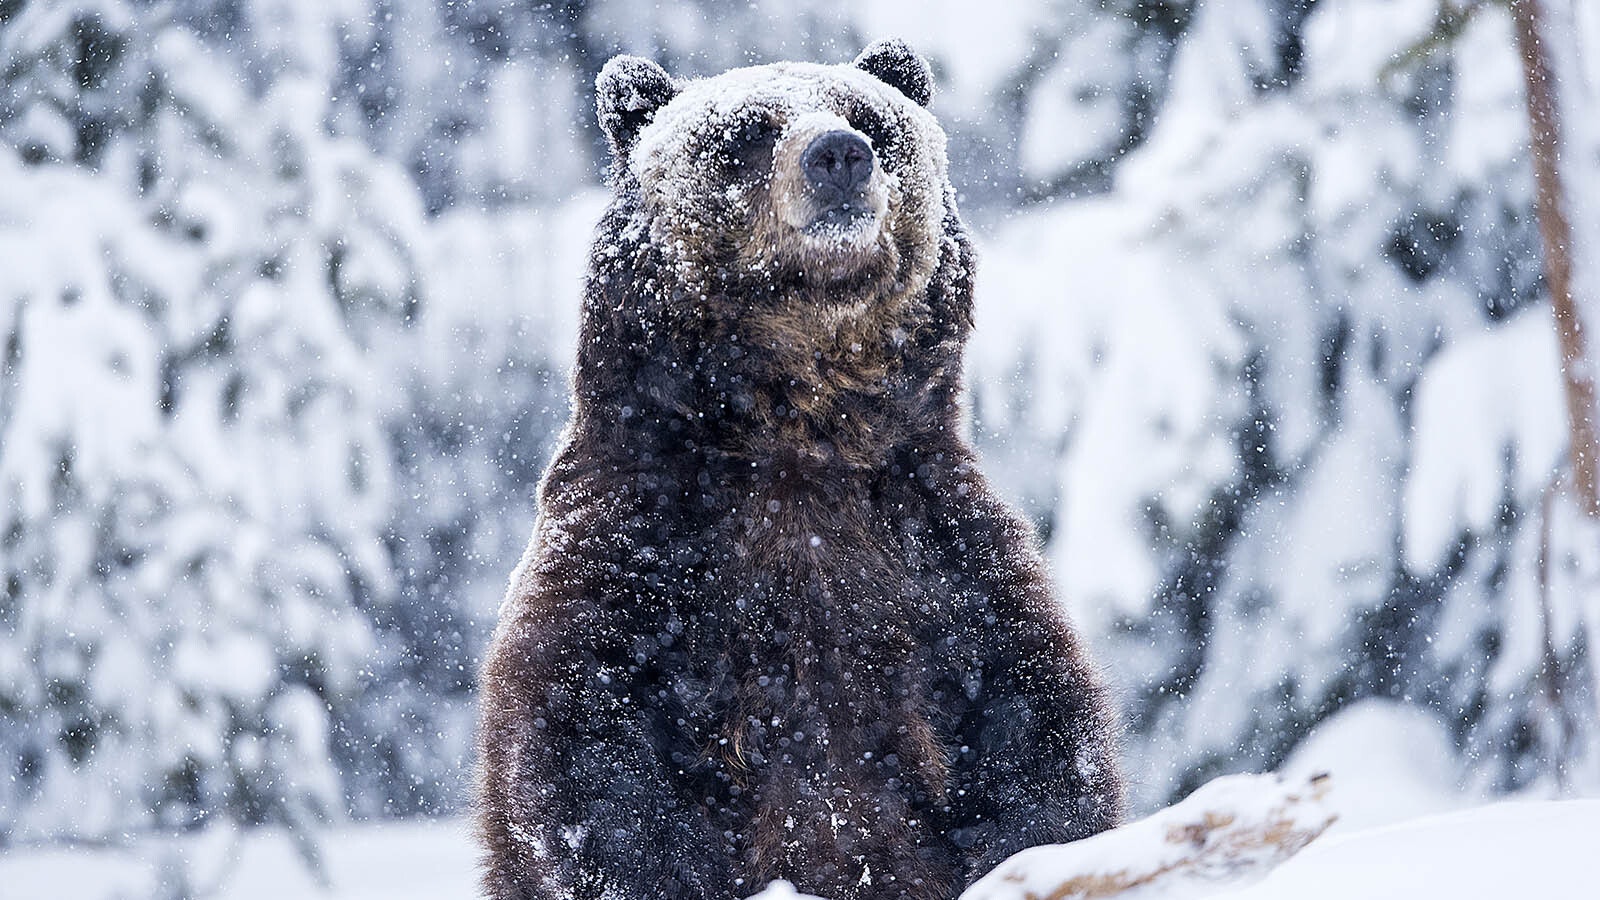 Grizzly winter